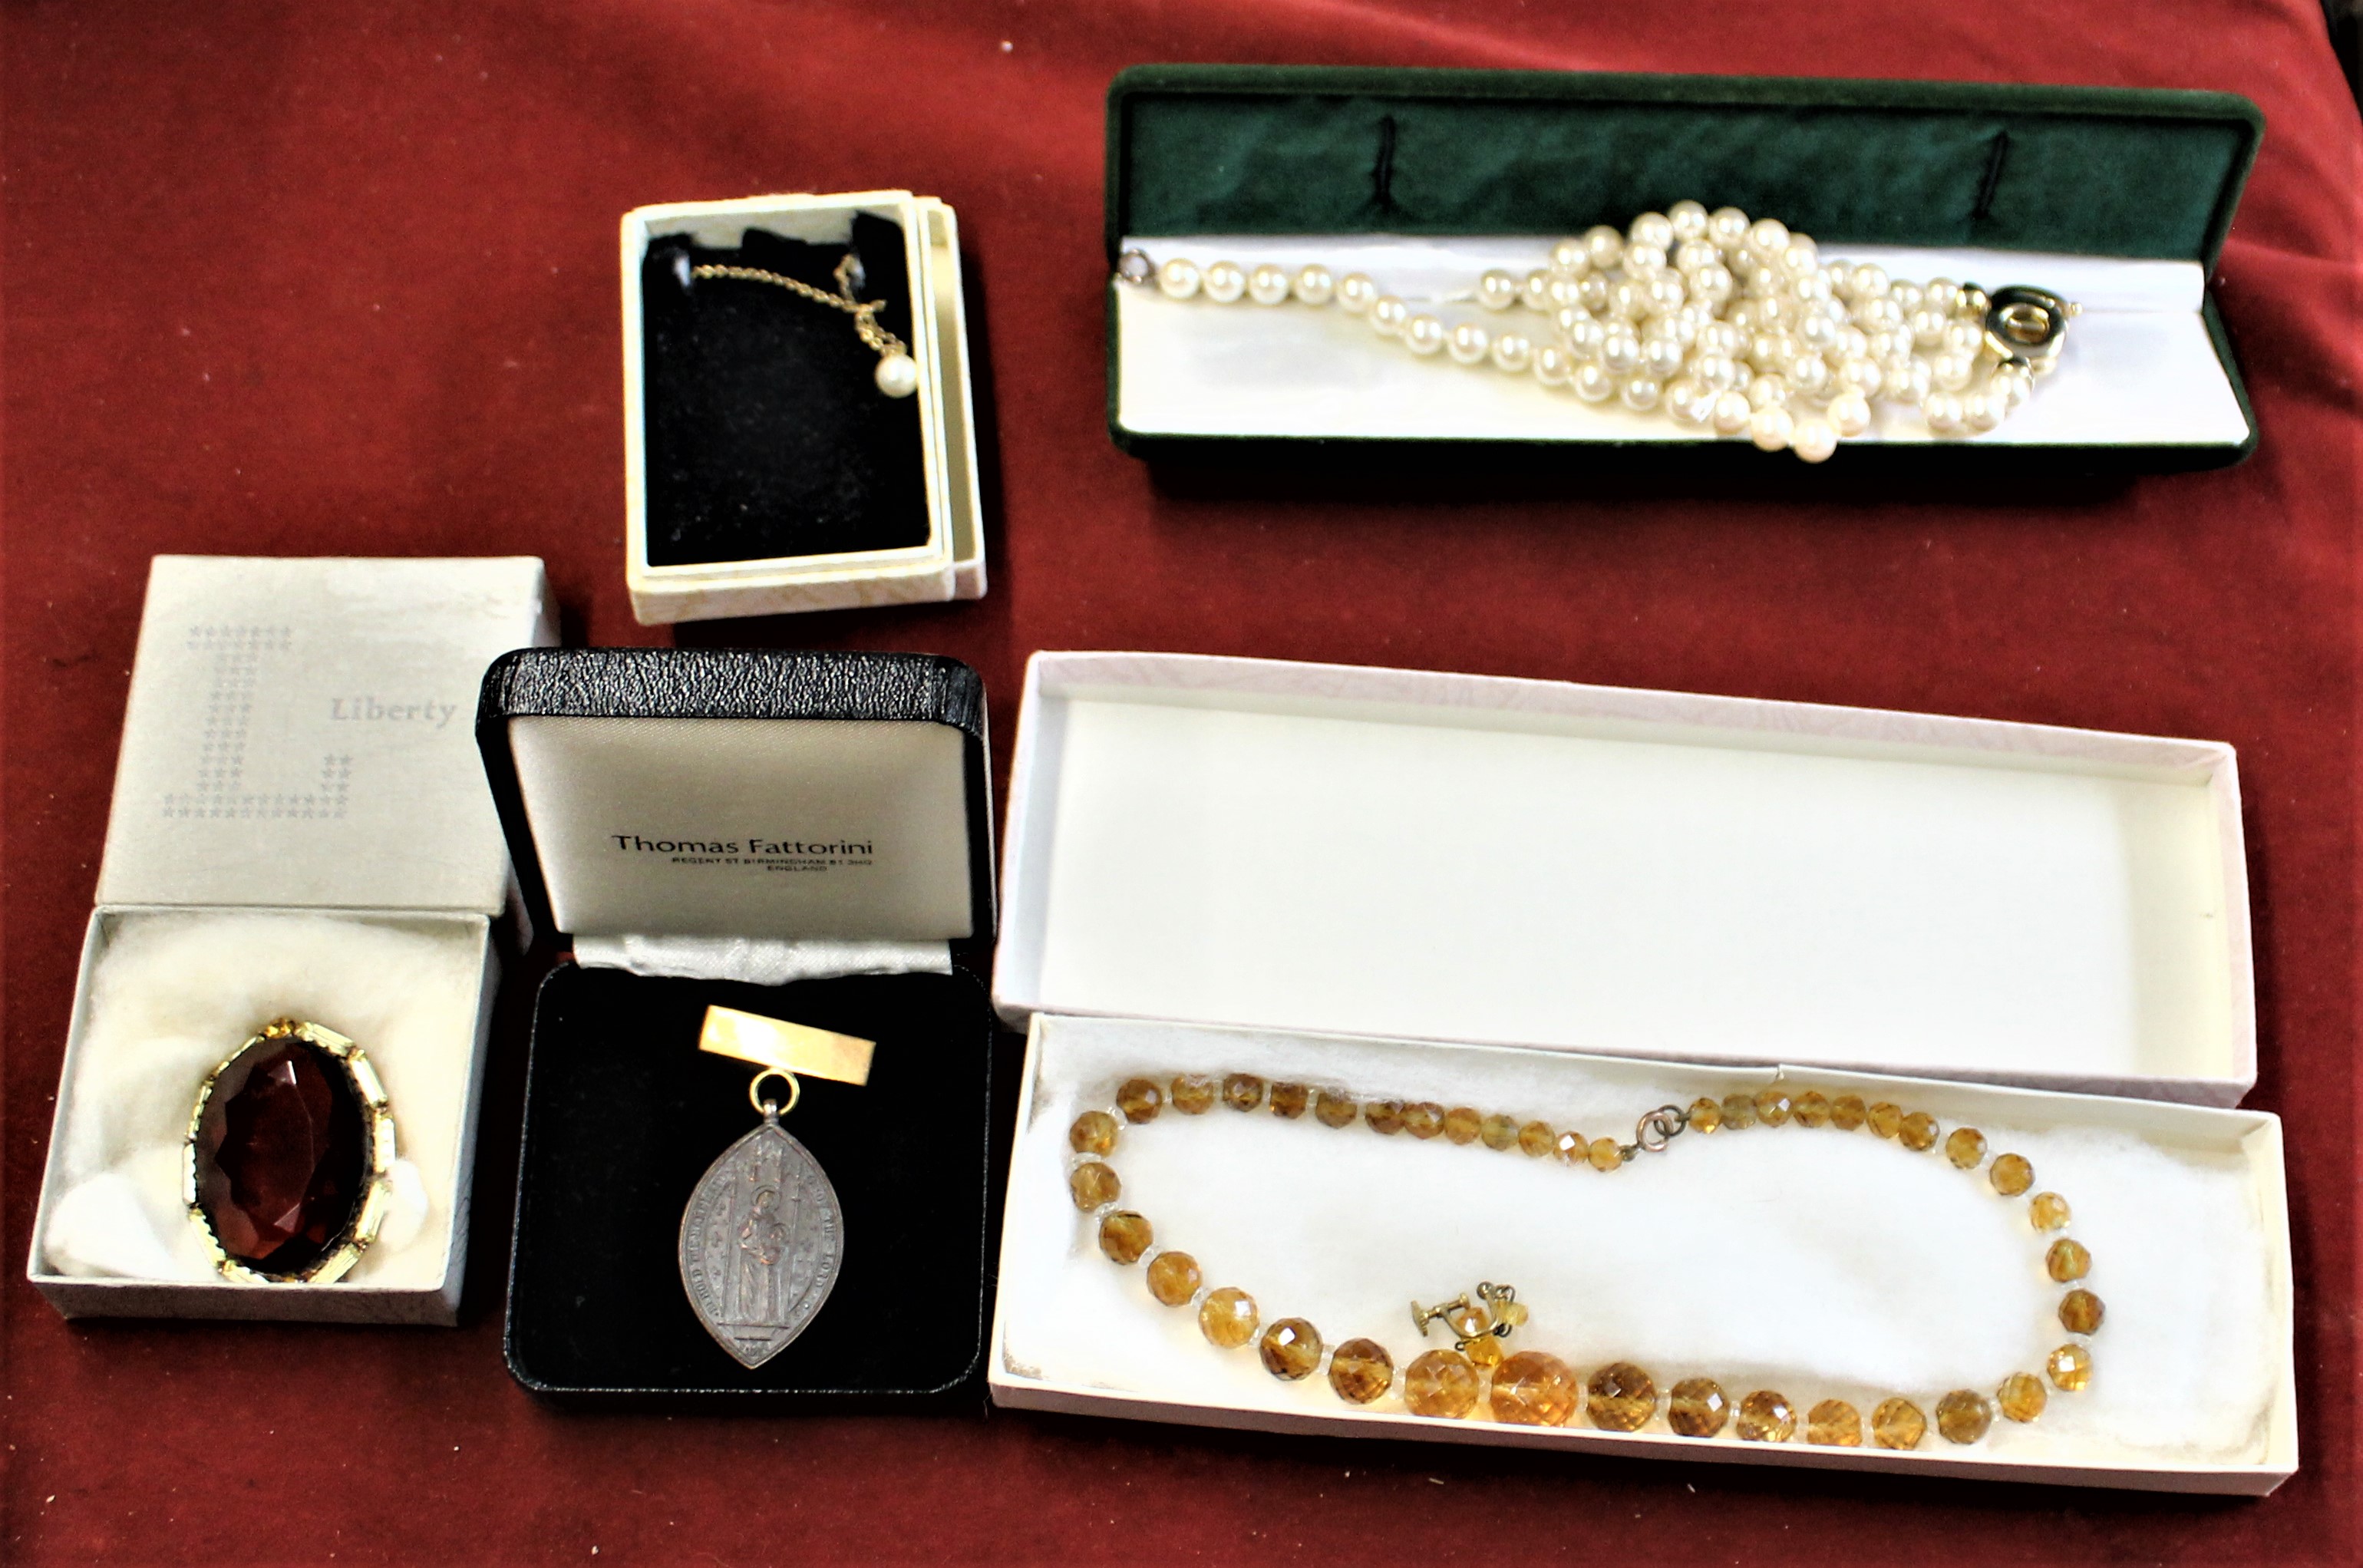 Vintage Jewellery including a Pearl drop necklace by Ratner's, a Pearl necklace with designer